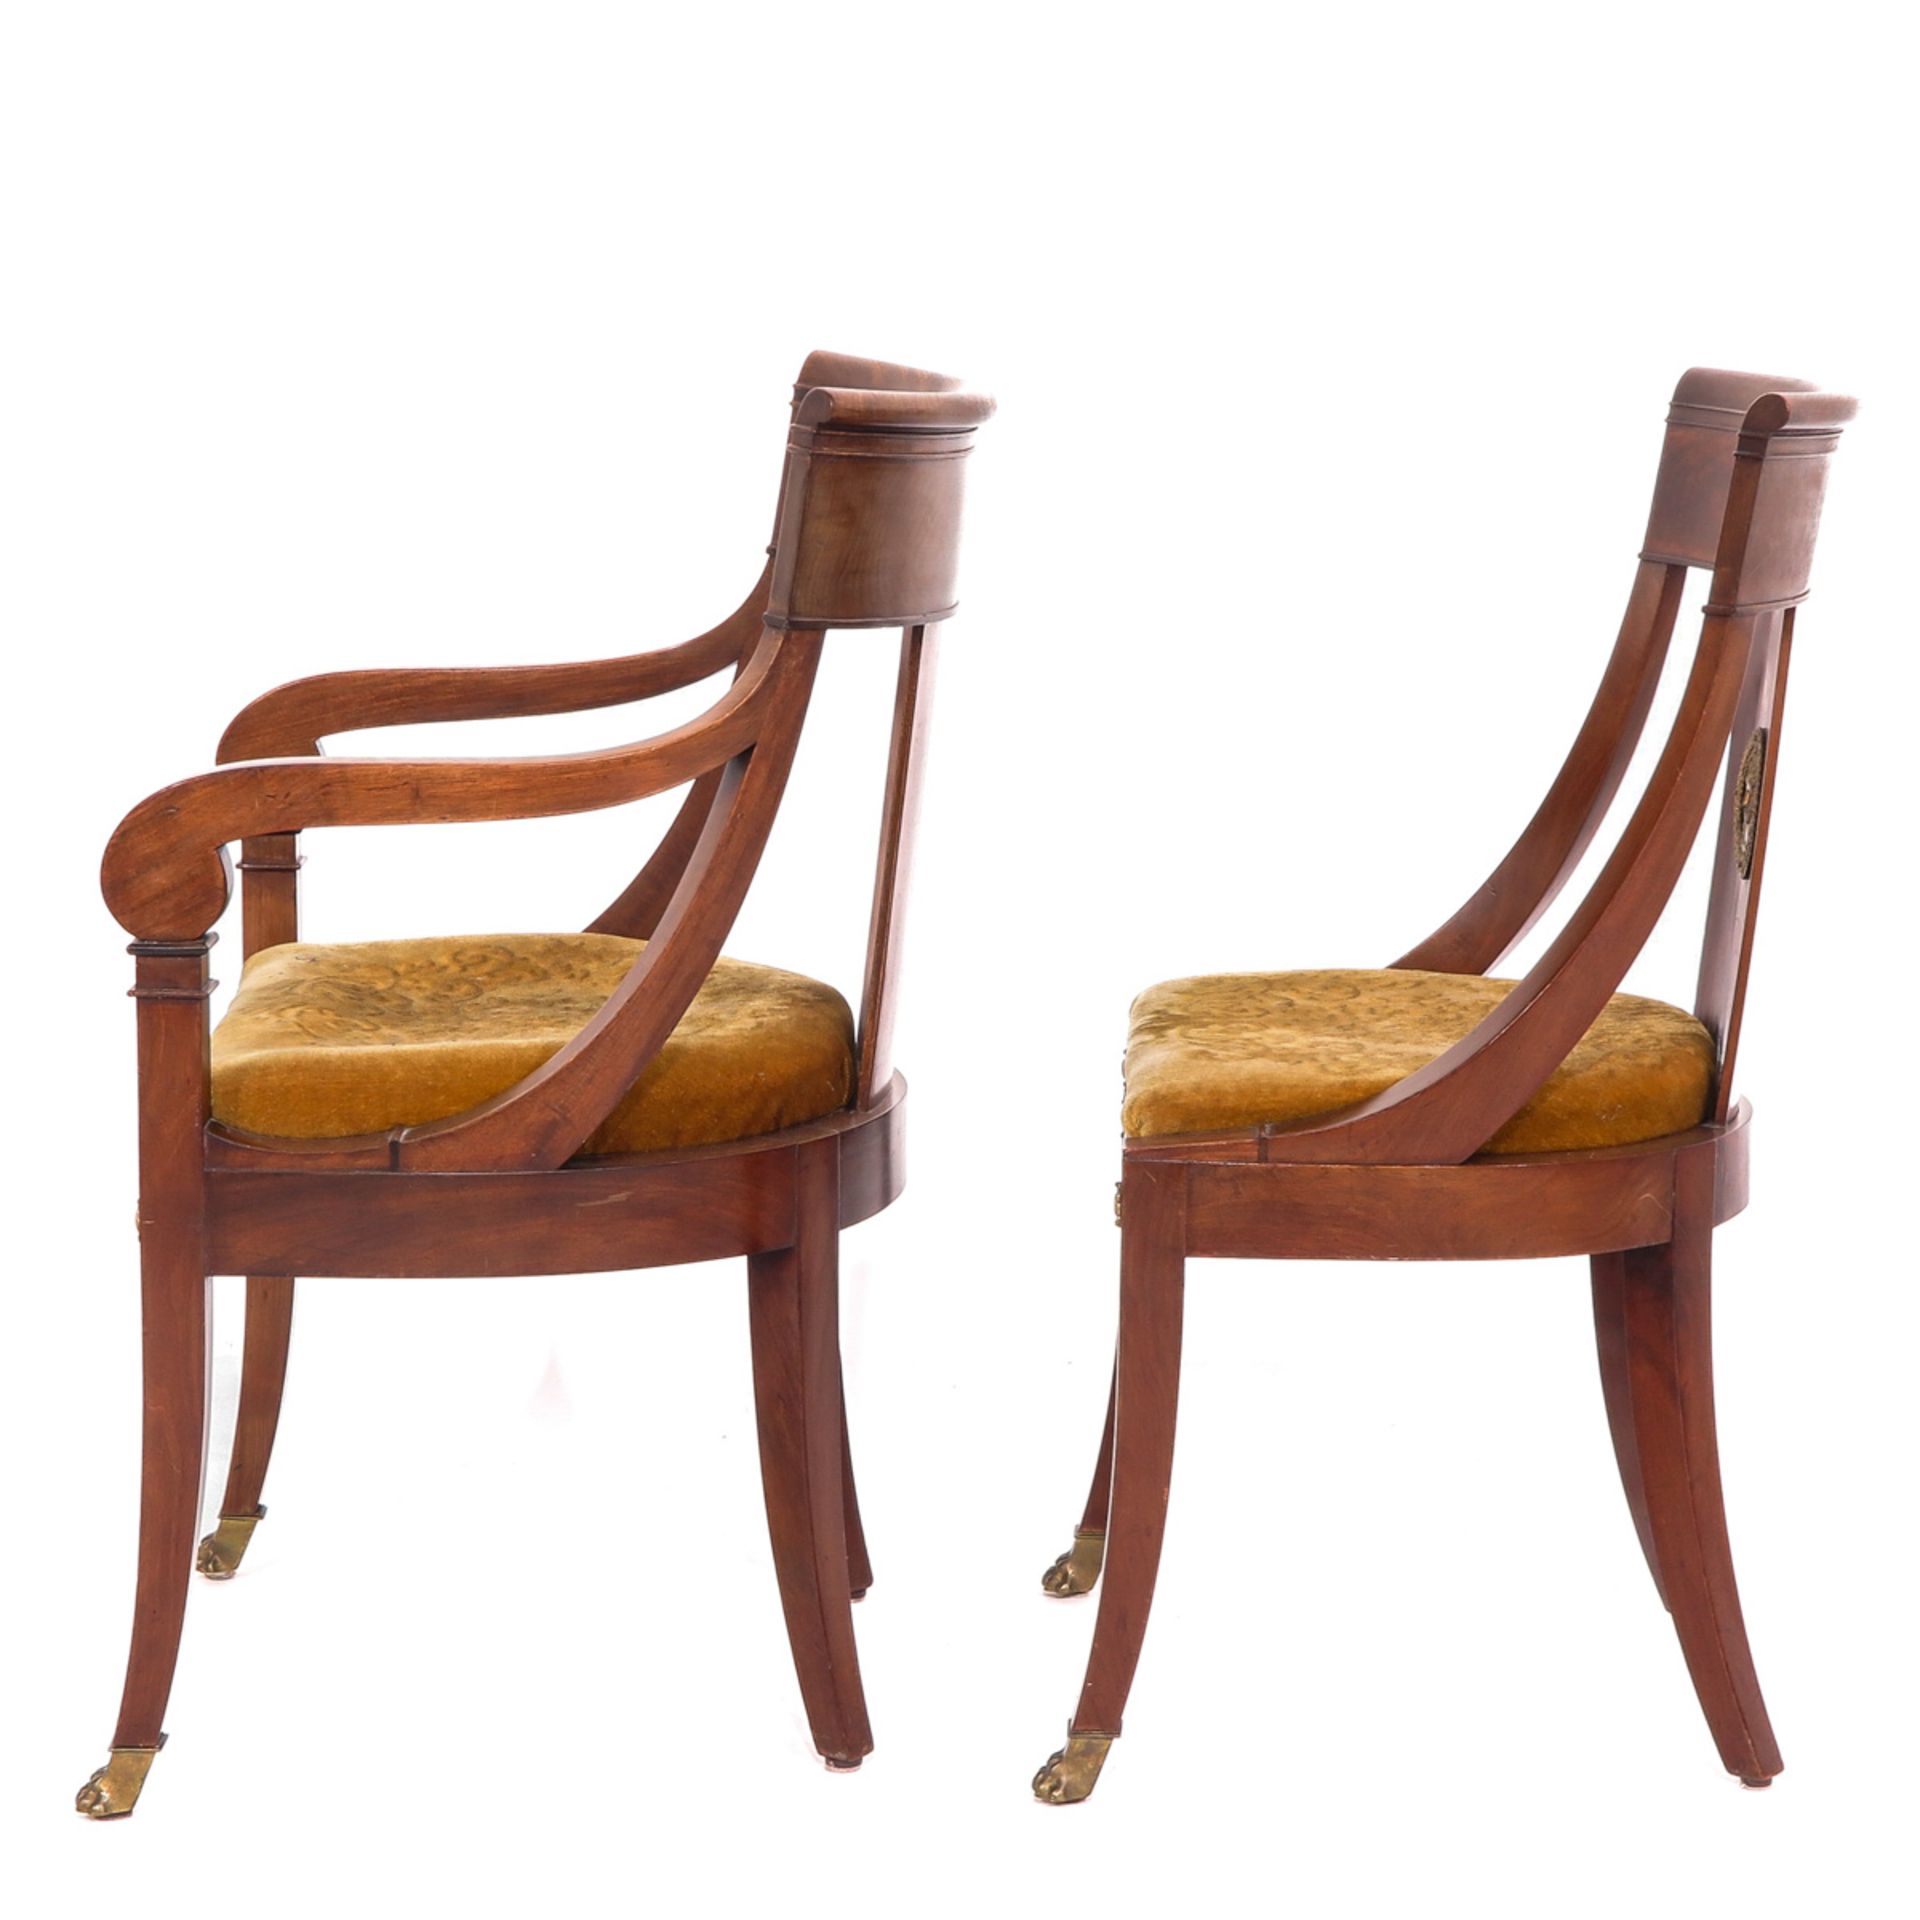 A Pair of Empire Period Chairs - Image 2 of 10